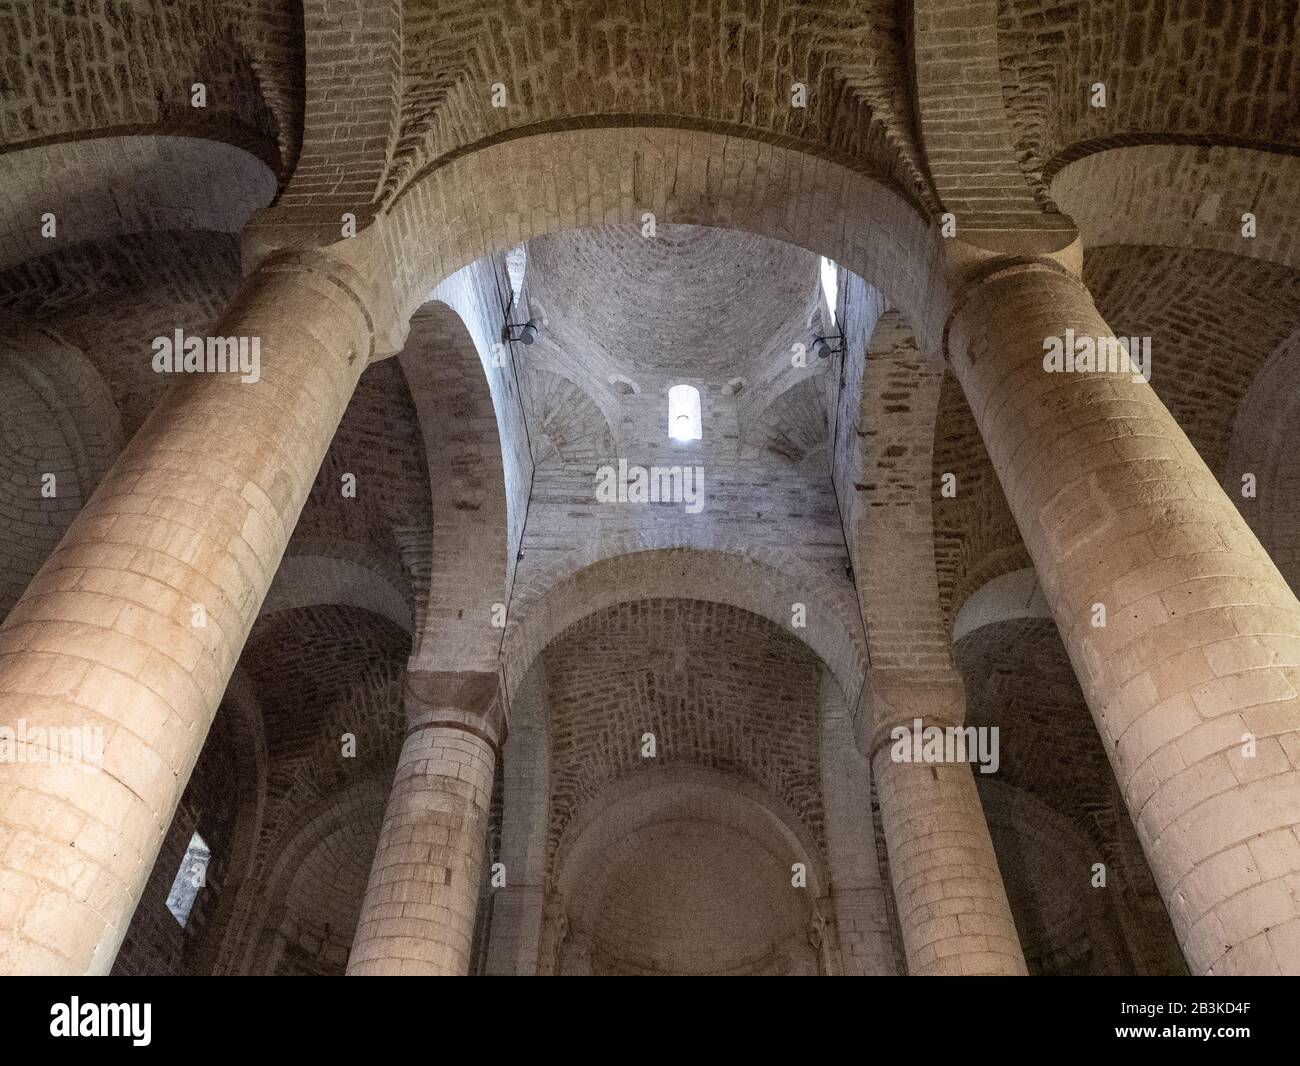 Italy, Marche, Genga, Romanesque abbey of San Vittore in the Monti Sibillini National Park Stock Photo